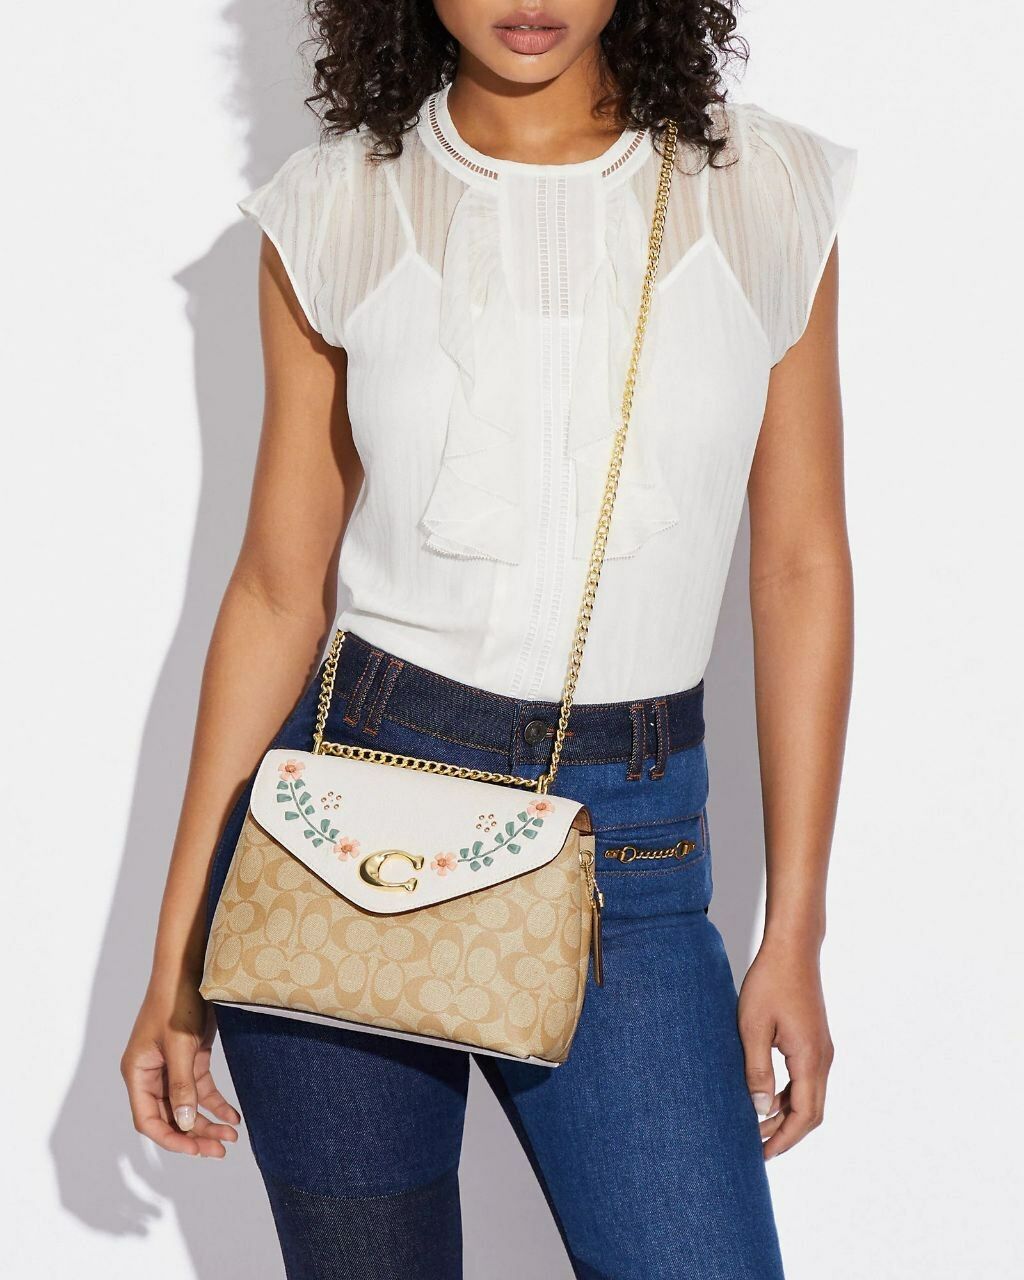 Tammie Shoulder Bag In Signature Canvas With Floral Whipstitch3.jpg